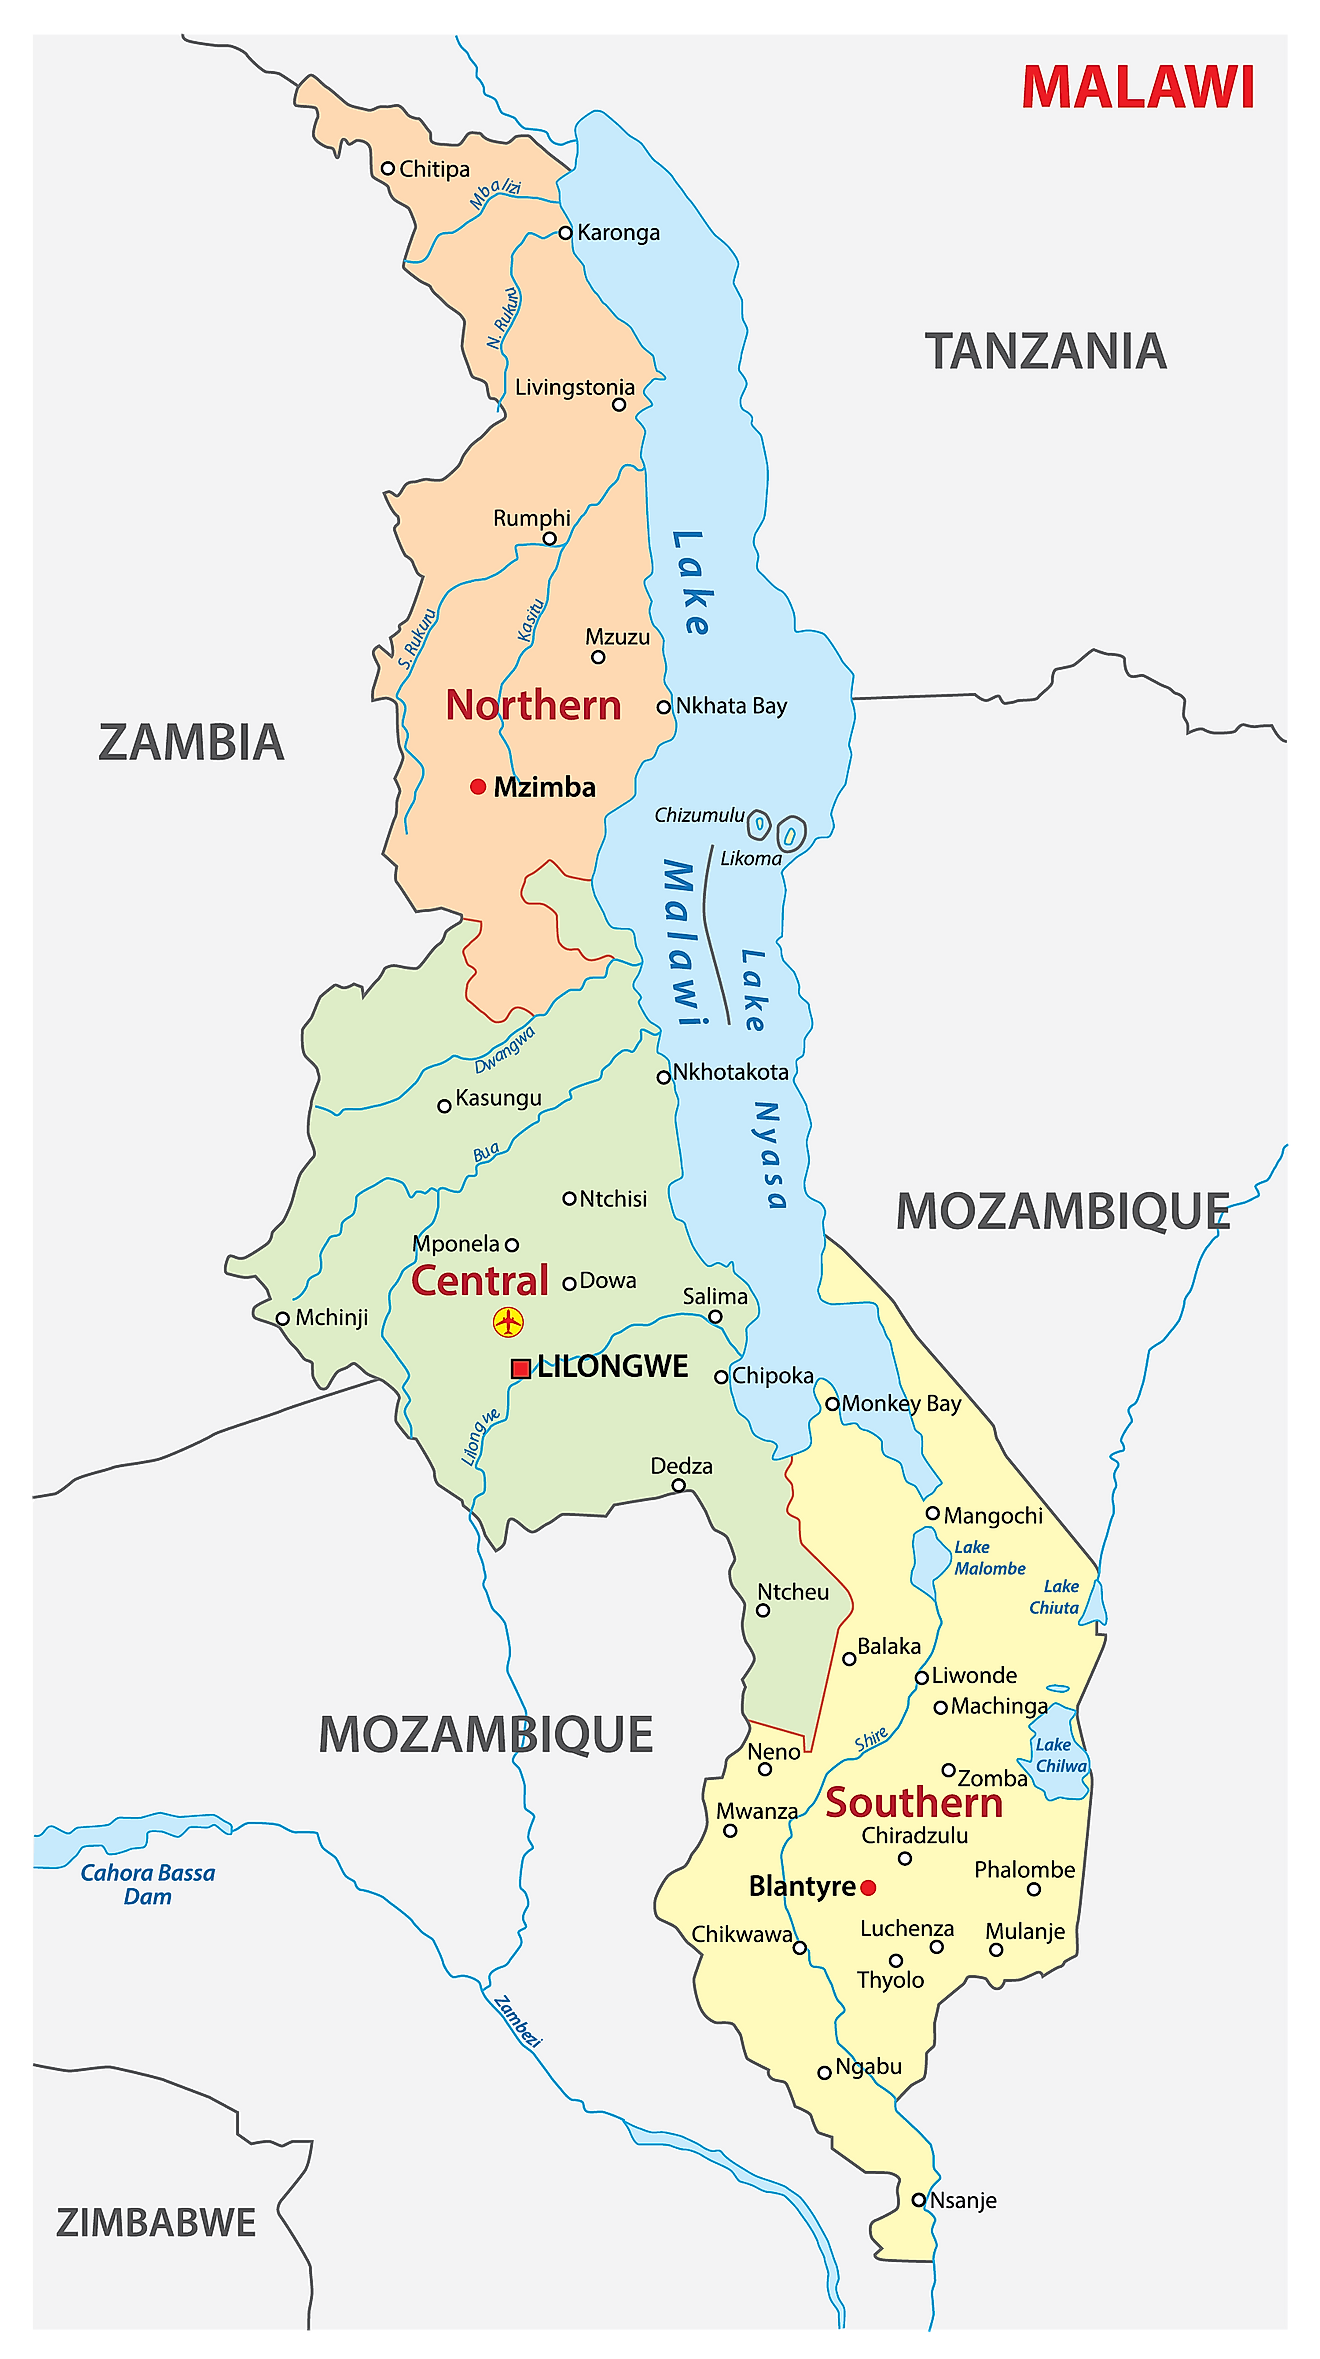 Political Map of Malawi showing its administrative divisions and national capital of Lilongwe.